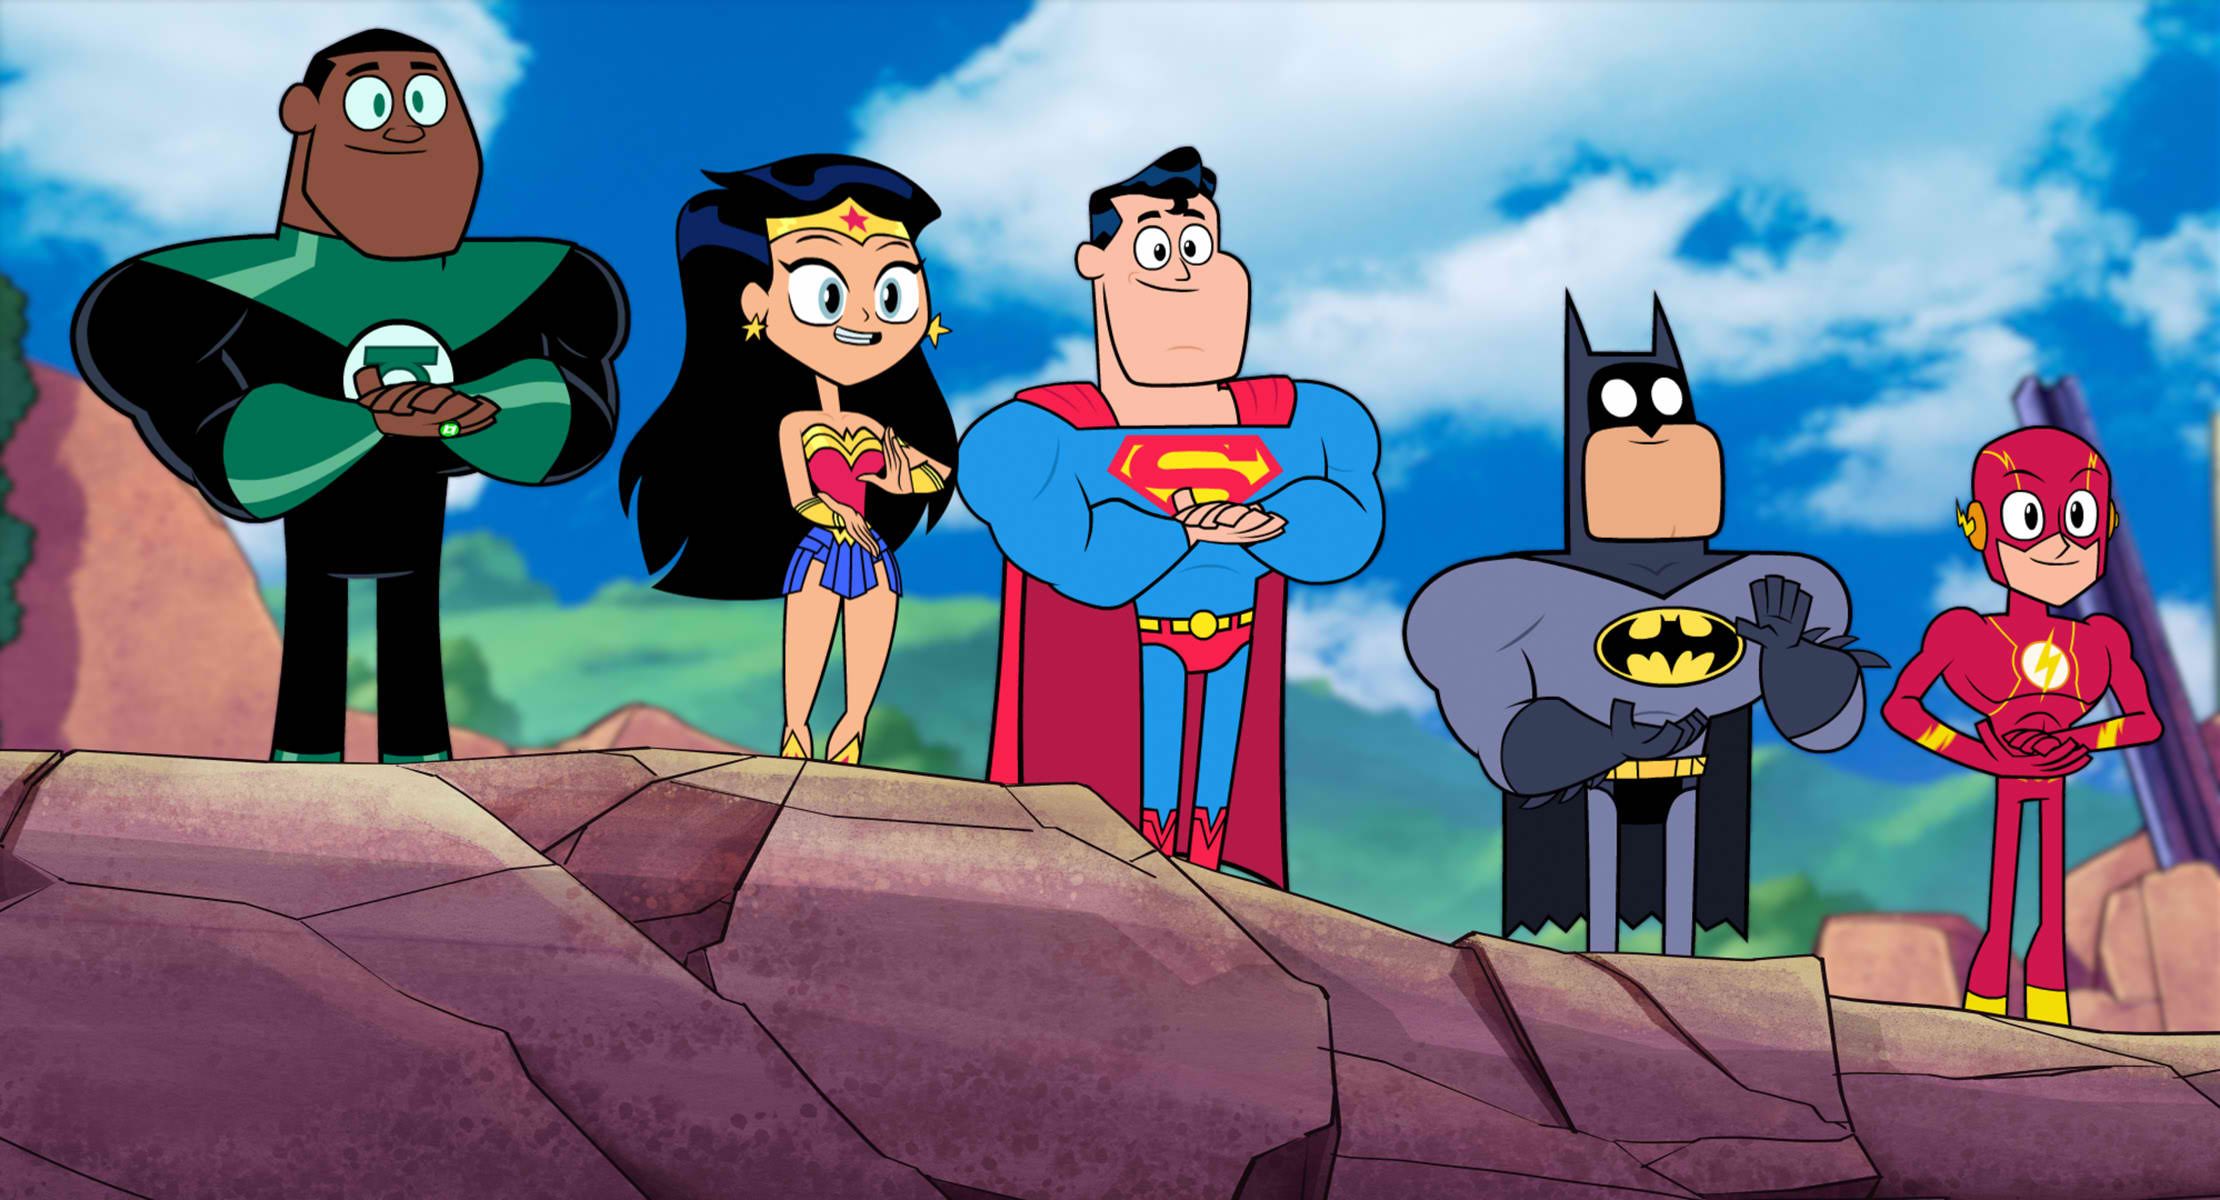 SPECIAL APPEARANCE. The members of the Justice League make a special appearance in the movie.  